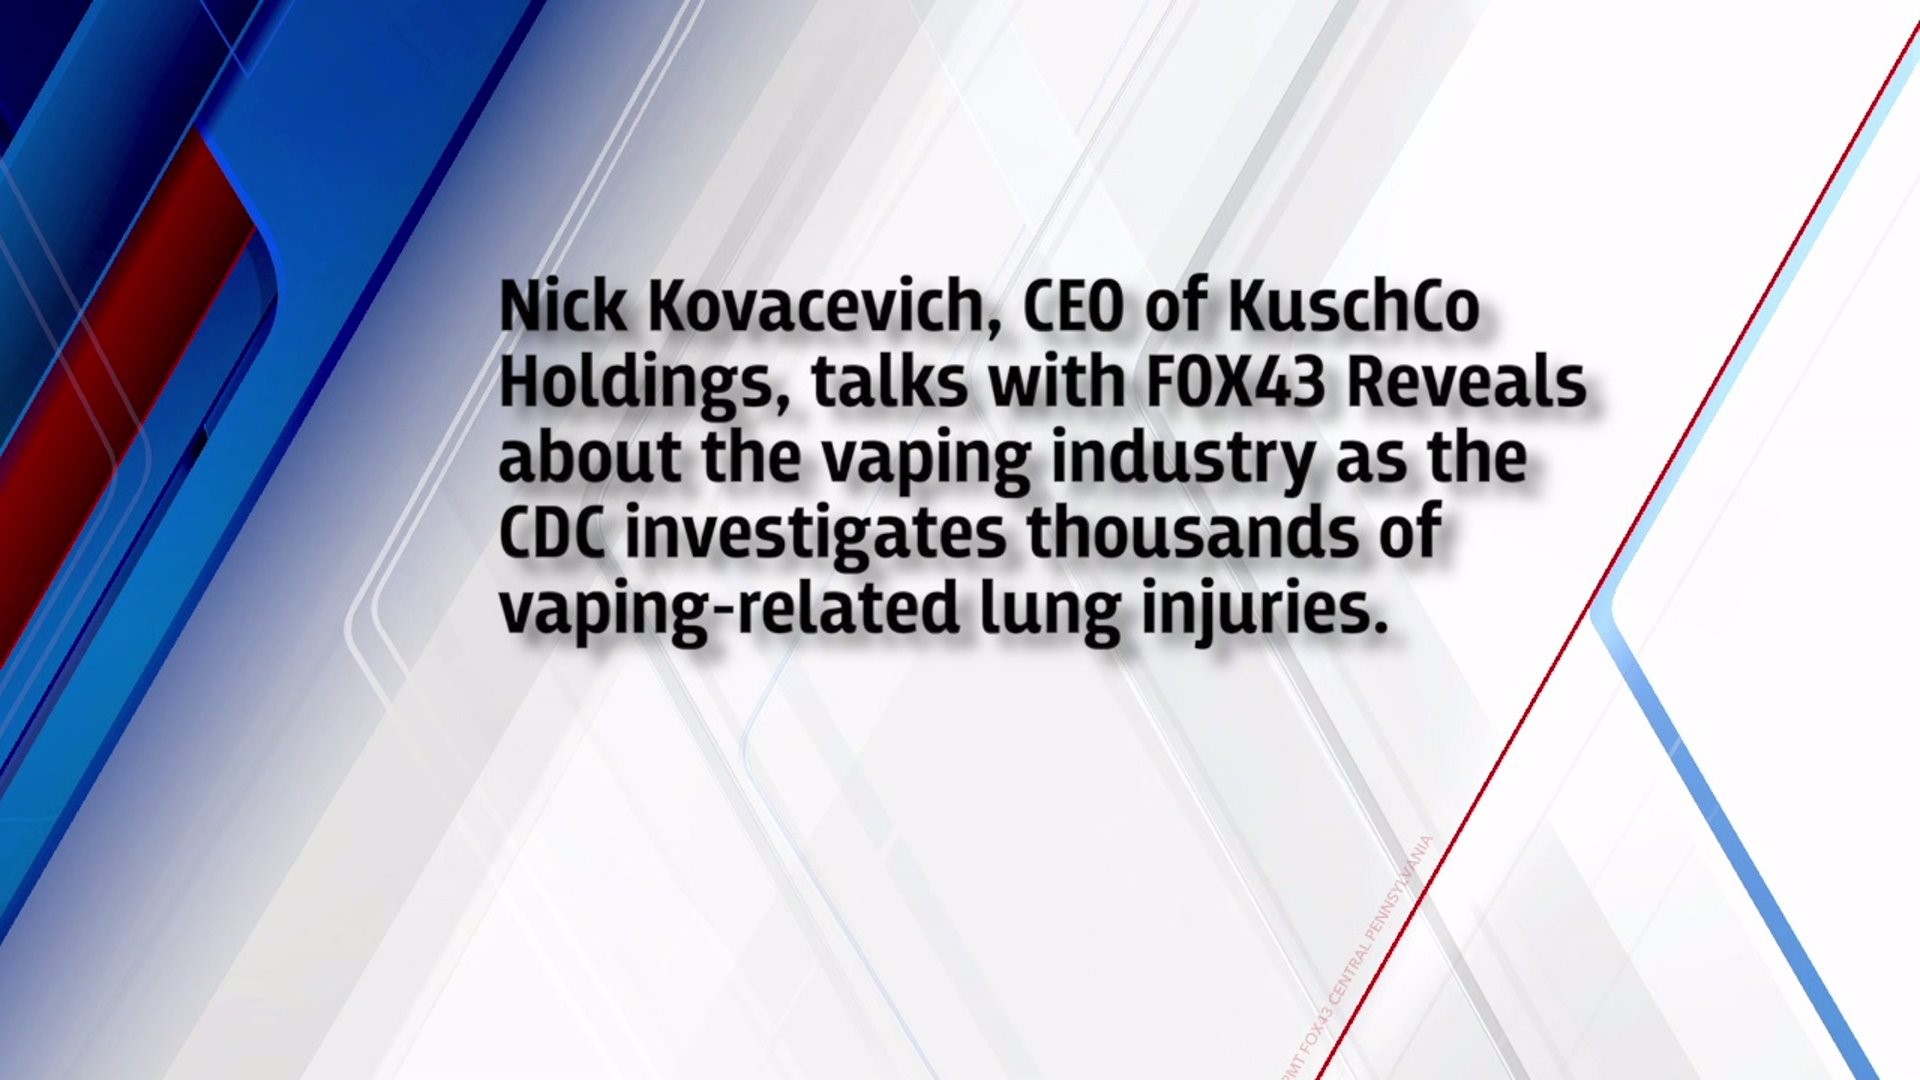 FOX43 REVEALS Web Extra on the vaping industry